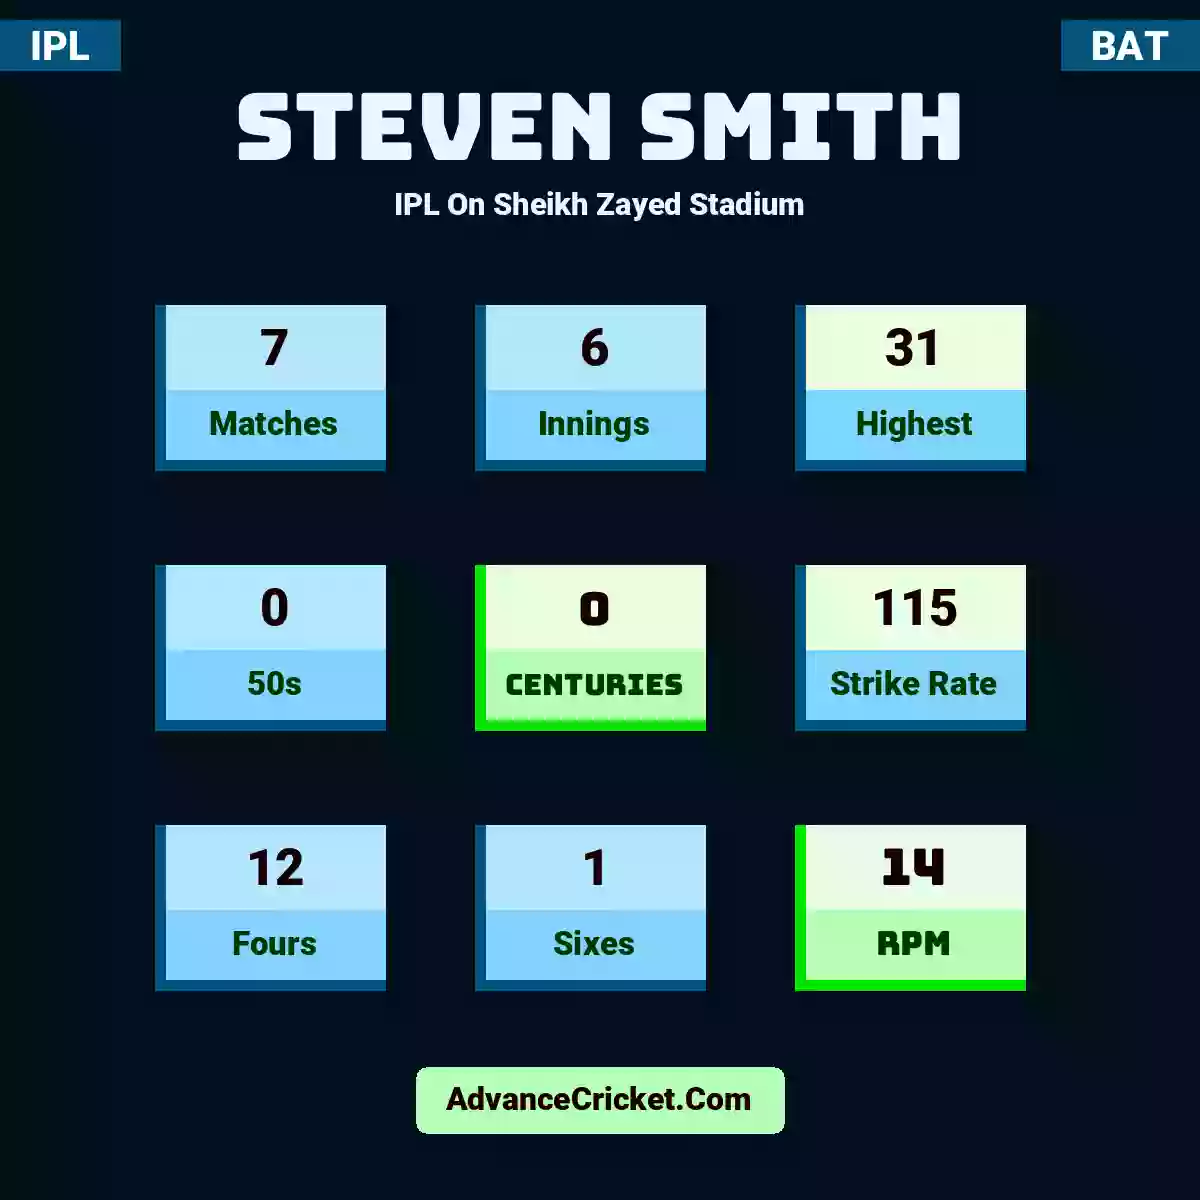 Steven Smith IPL  On Sheikh Zayed Stadium, Steven Smith played 7 matches, scored 31 runs as highest, 0 half-centuries, and 0 centuries, with a strike rate of 115. S.Smith hit 12 fours and 1 sixes, with an RPM of 14.